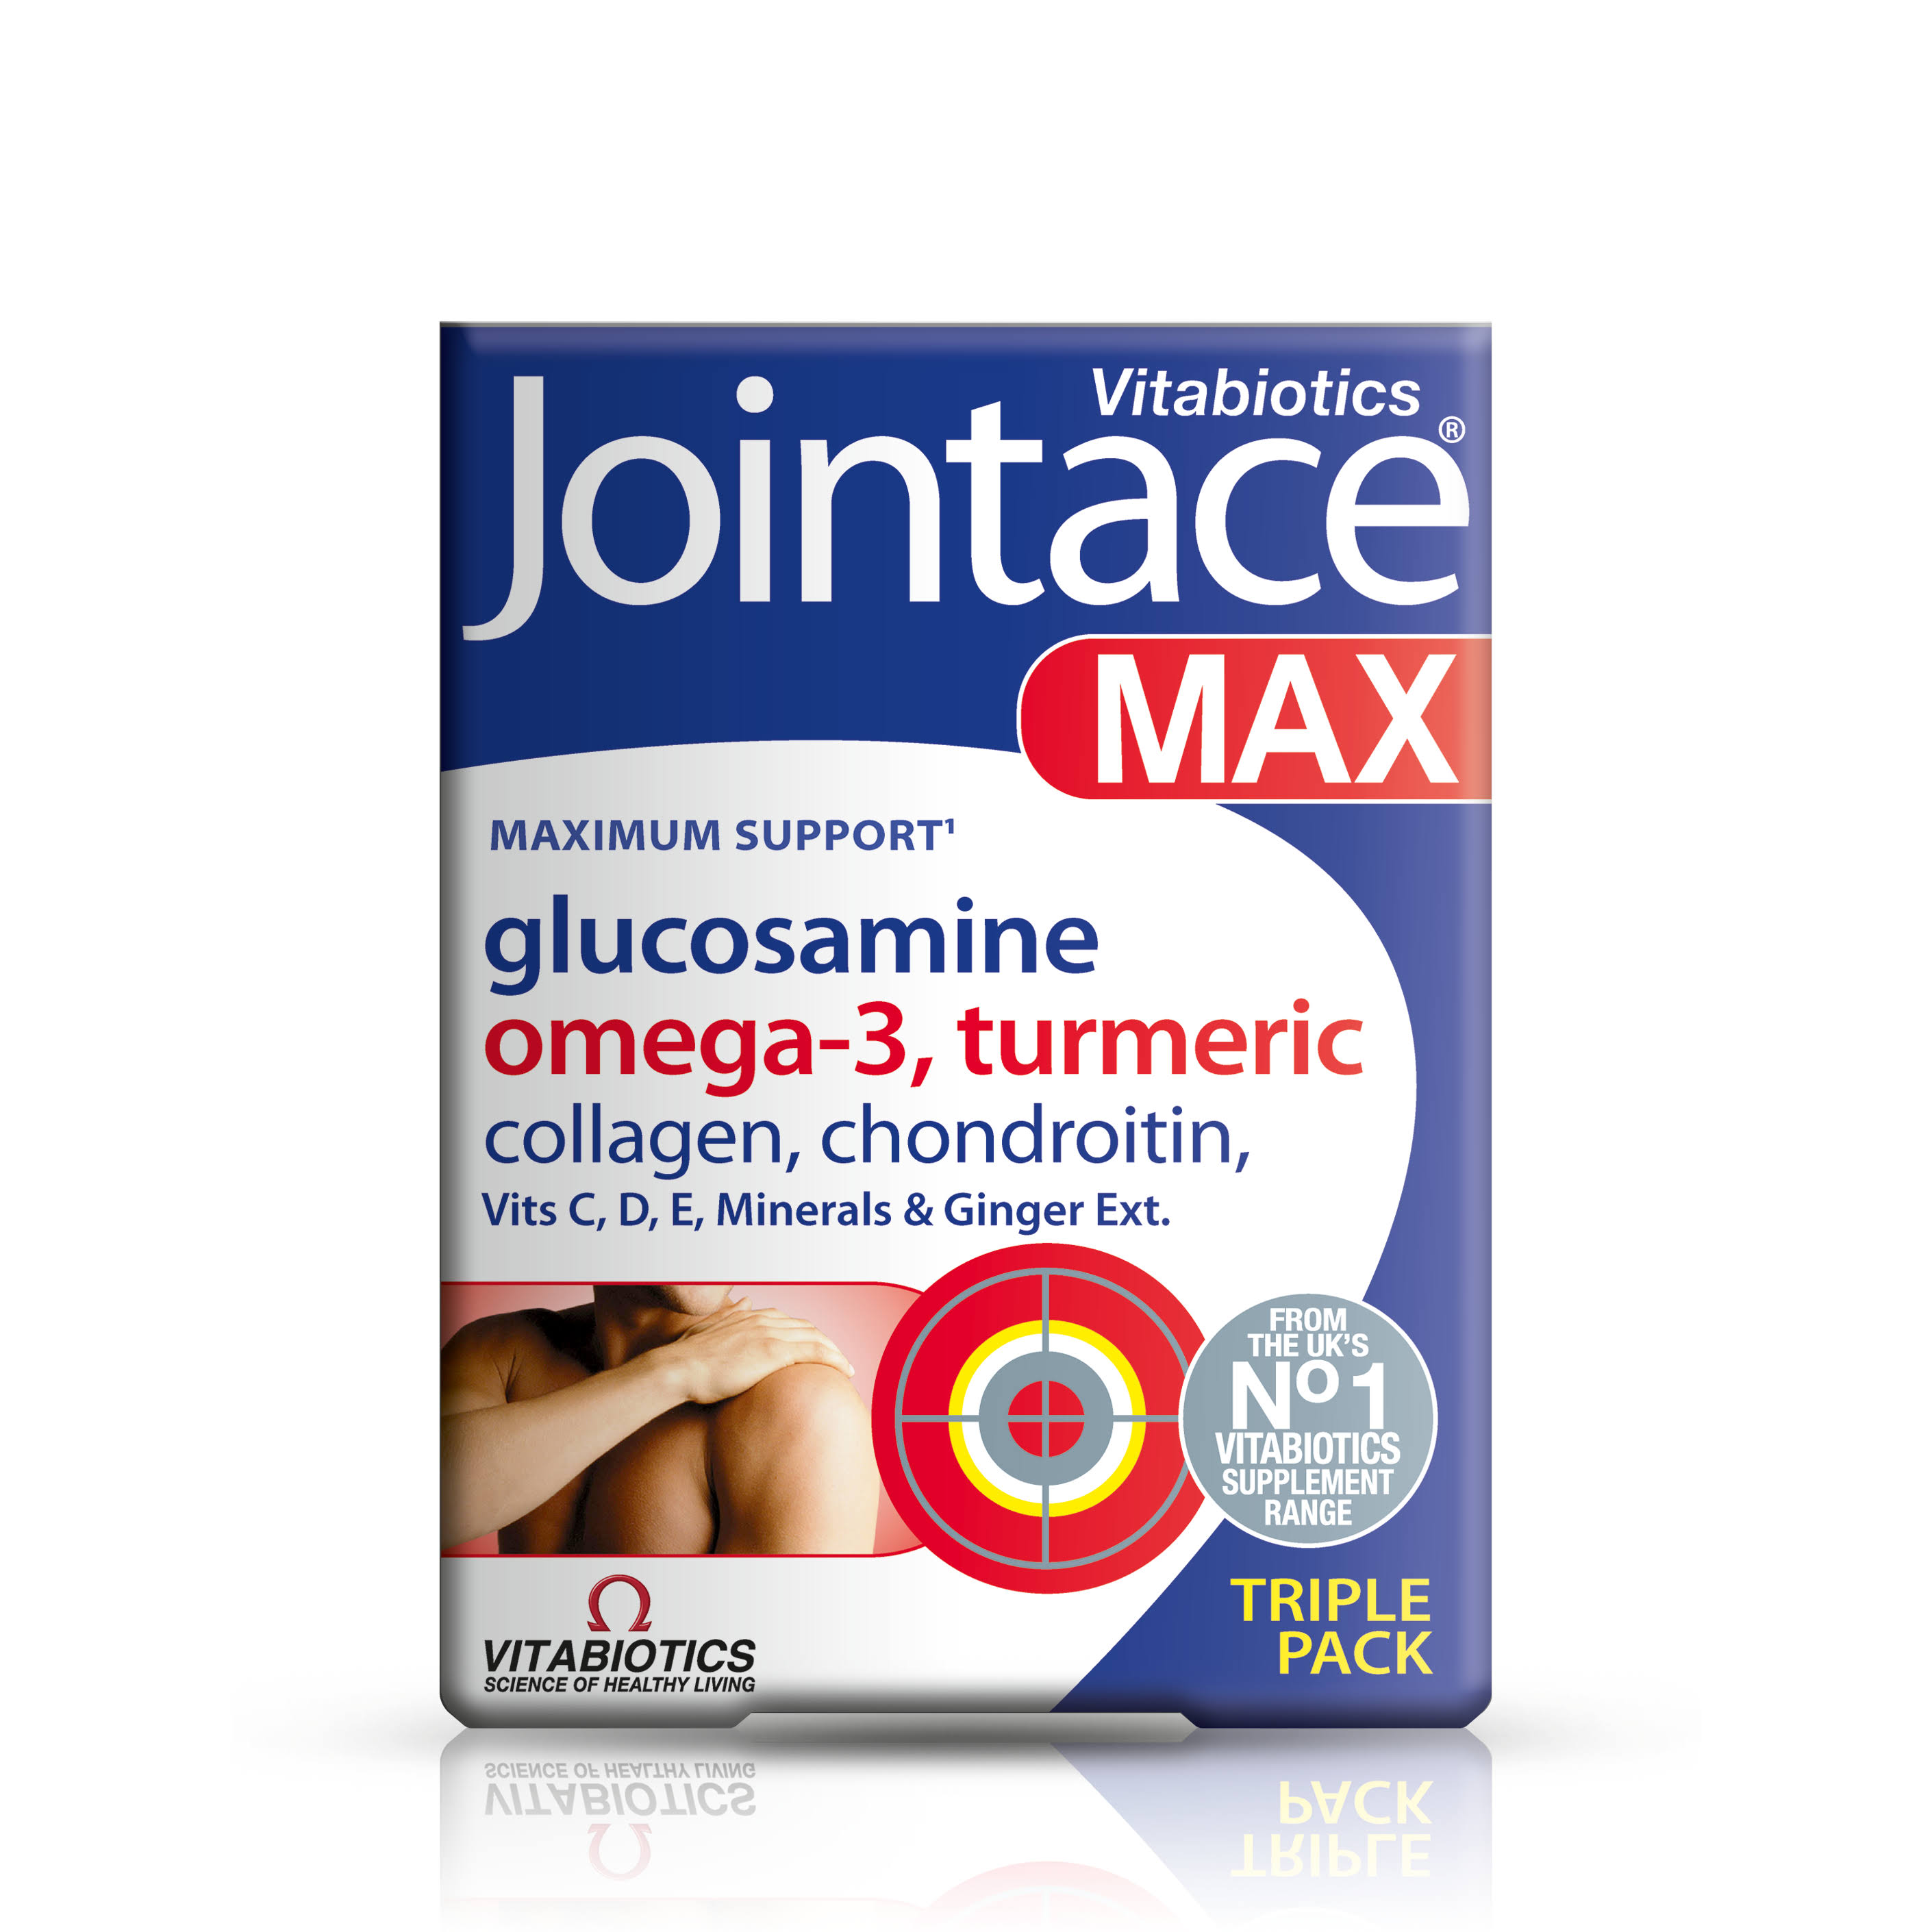 Vitabiotics Jointace Max Super Strength 3-In-1 Pack - 84 Tablets